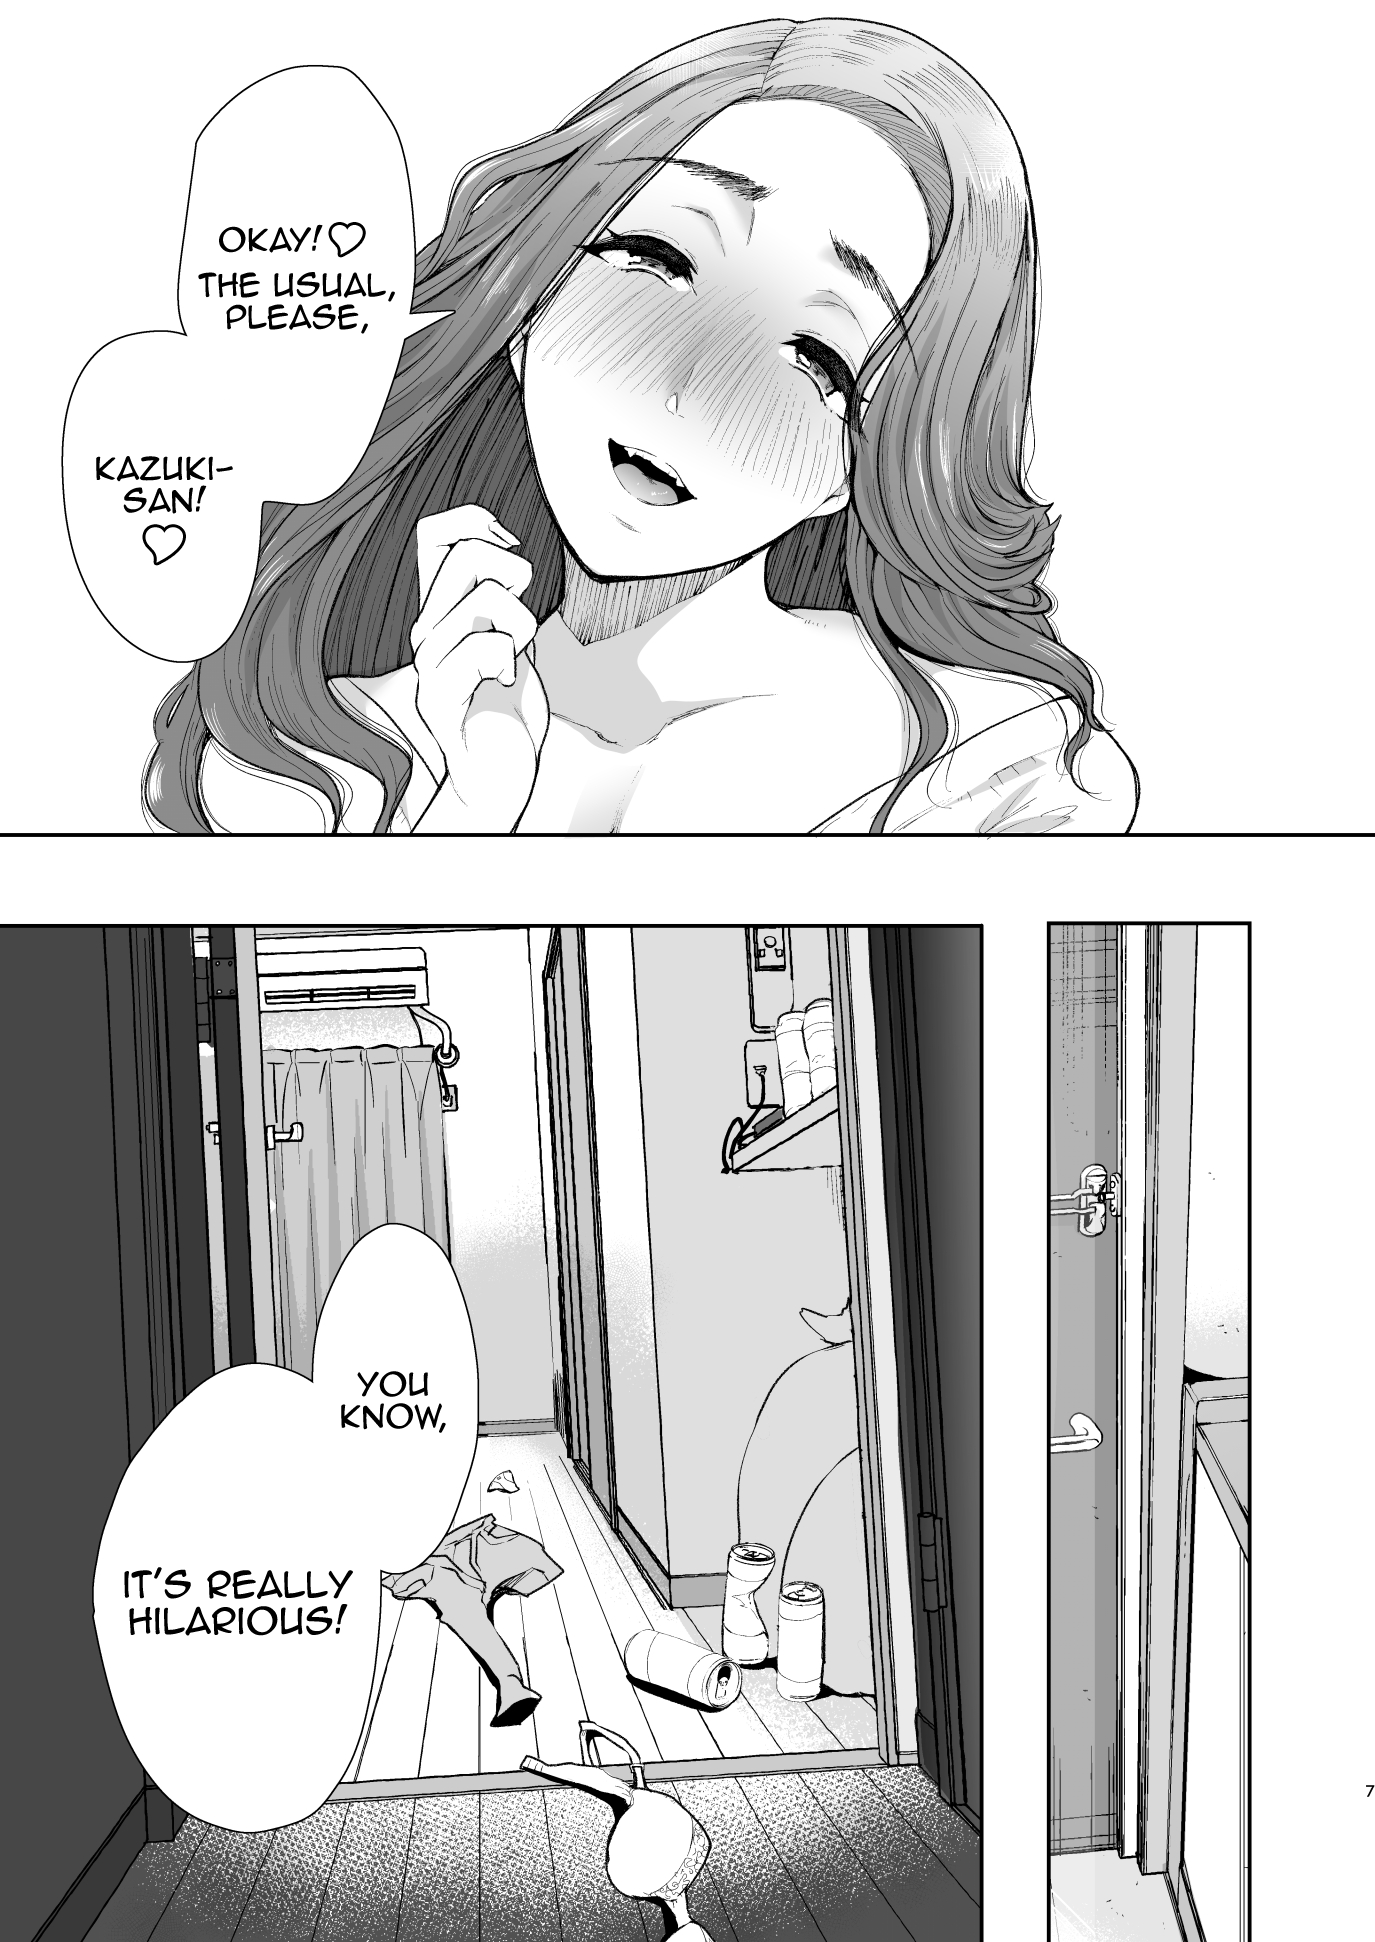 A Story of the Time I Hypnotized and NTRed the MILF Next Door - NTR hentai comics photo